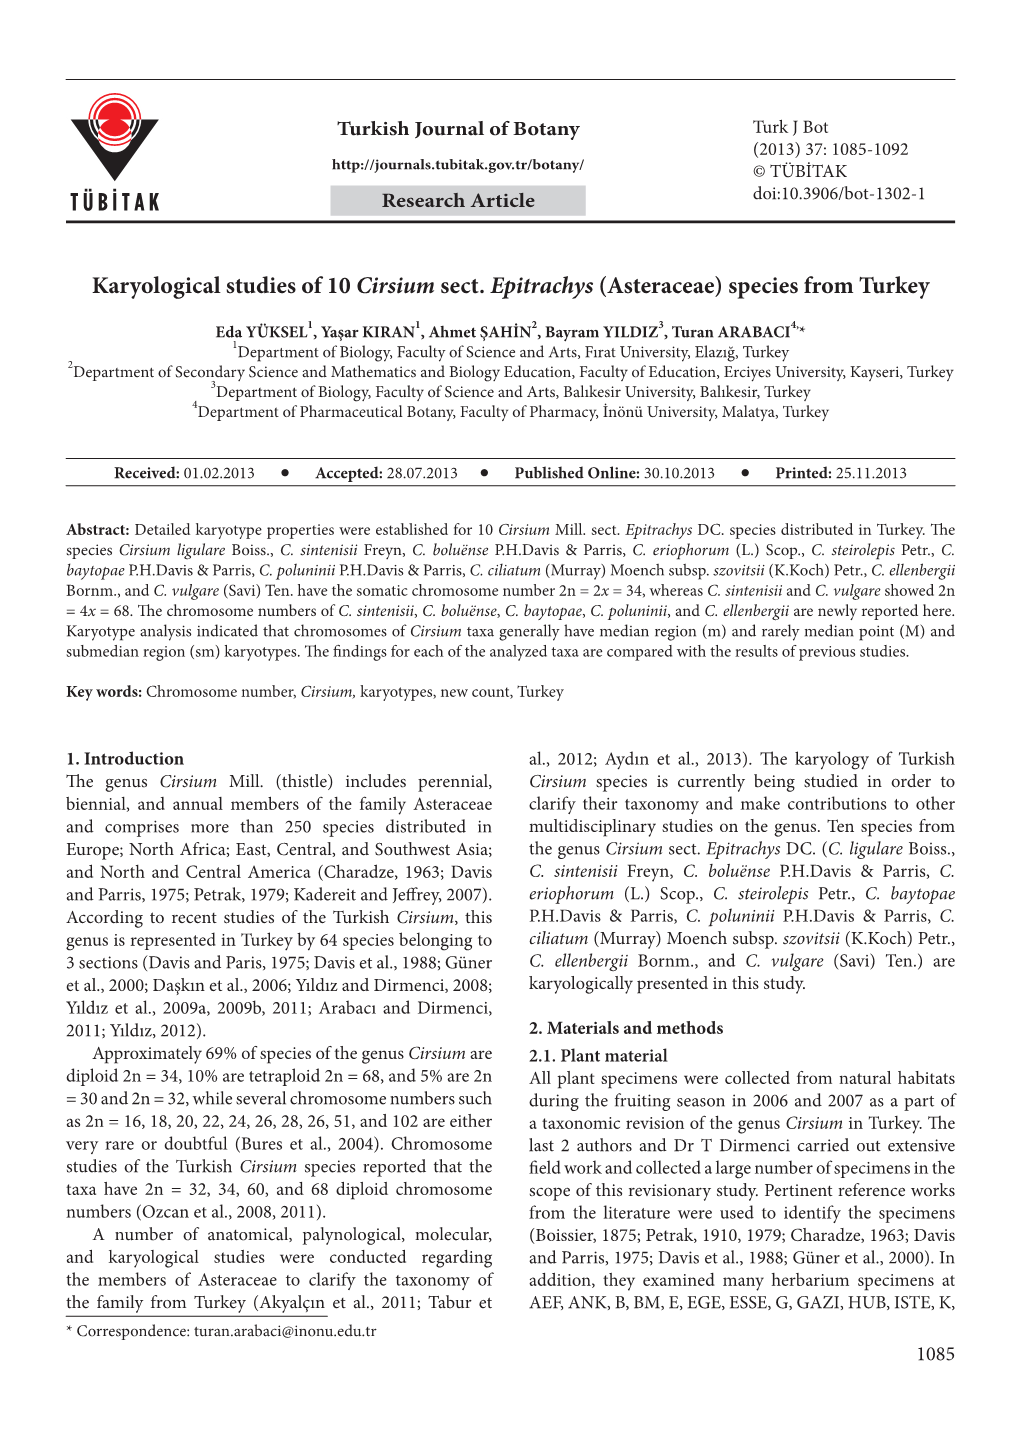 Karyological Studies of 10 Cirsium Sect. Epitrachys (Asteraceae) Species from Turkey